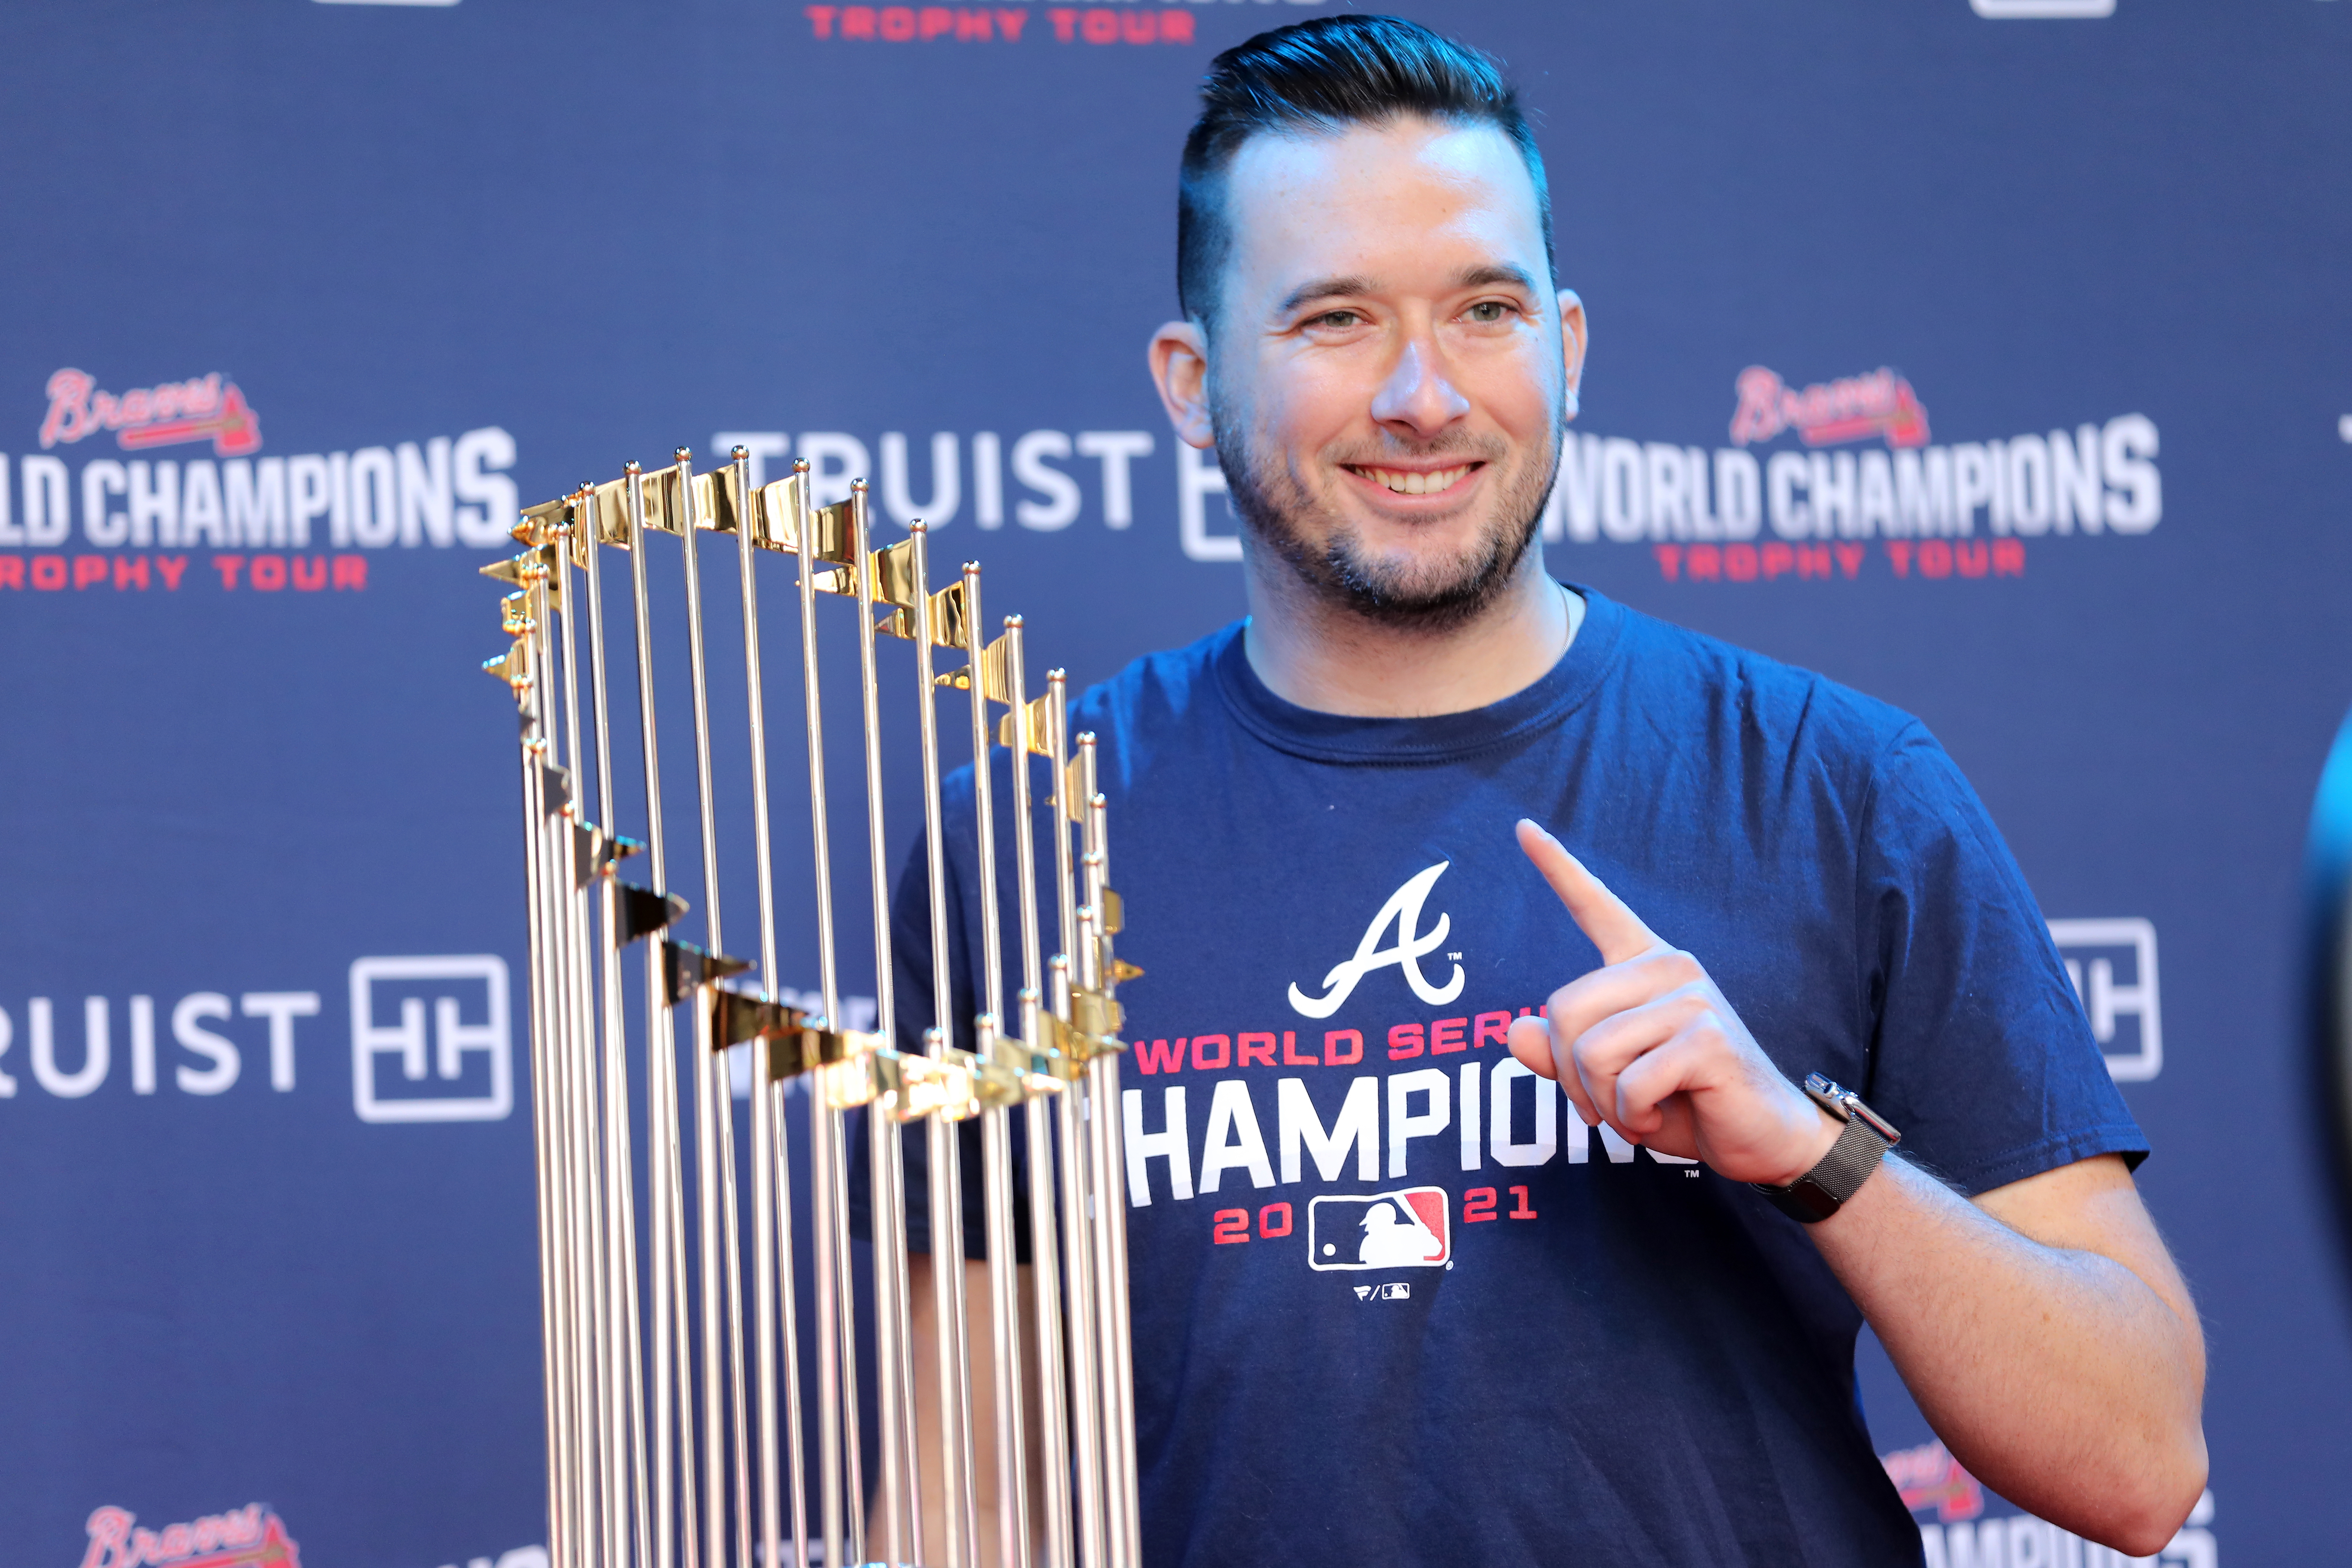 World Series trophy coming to Amesbury, area towns